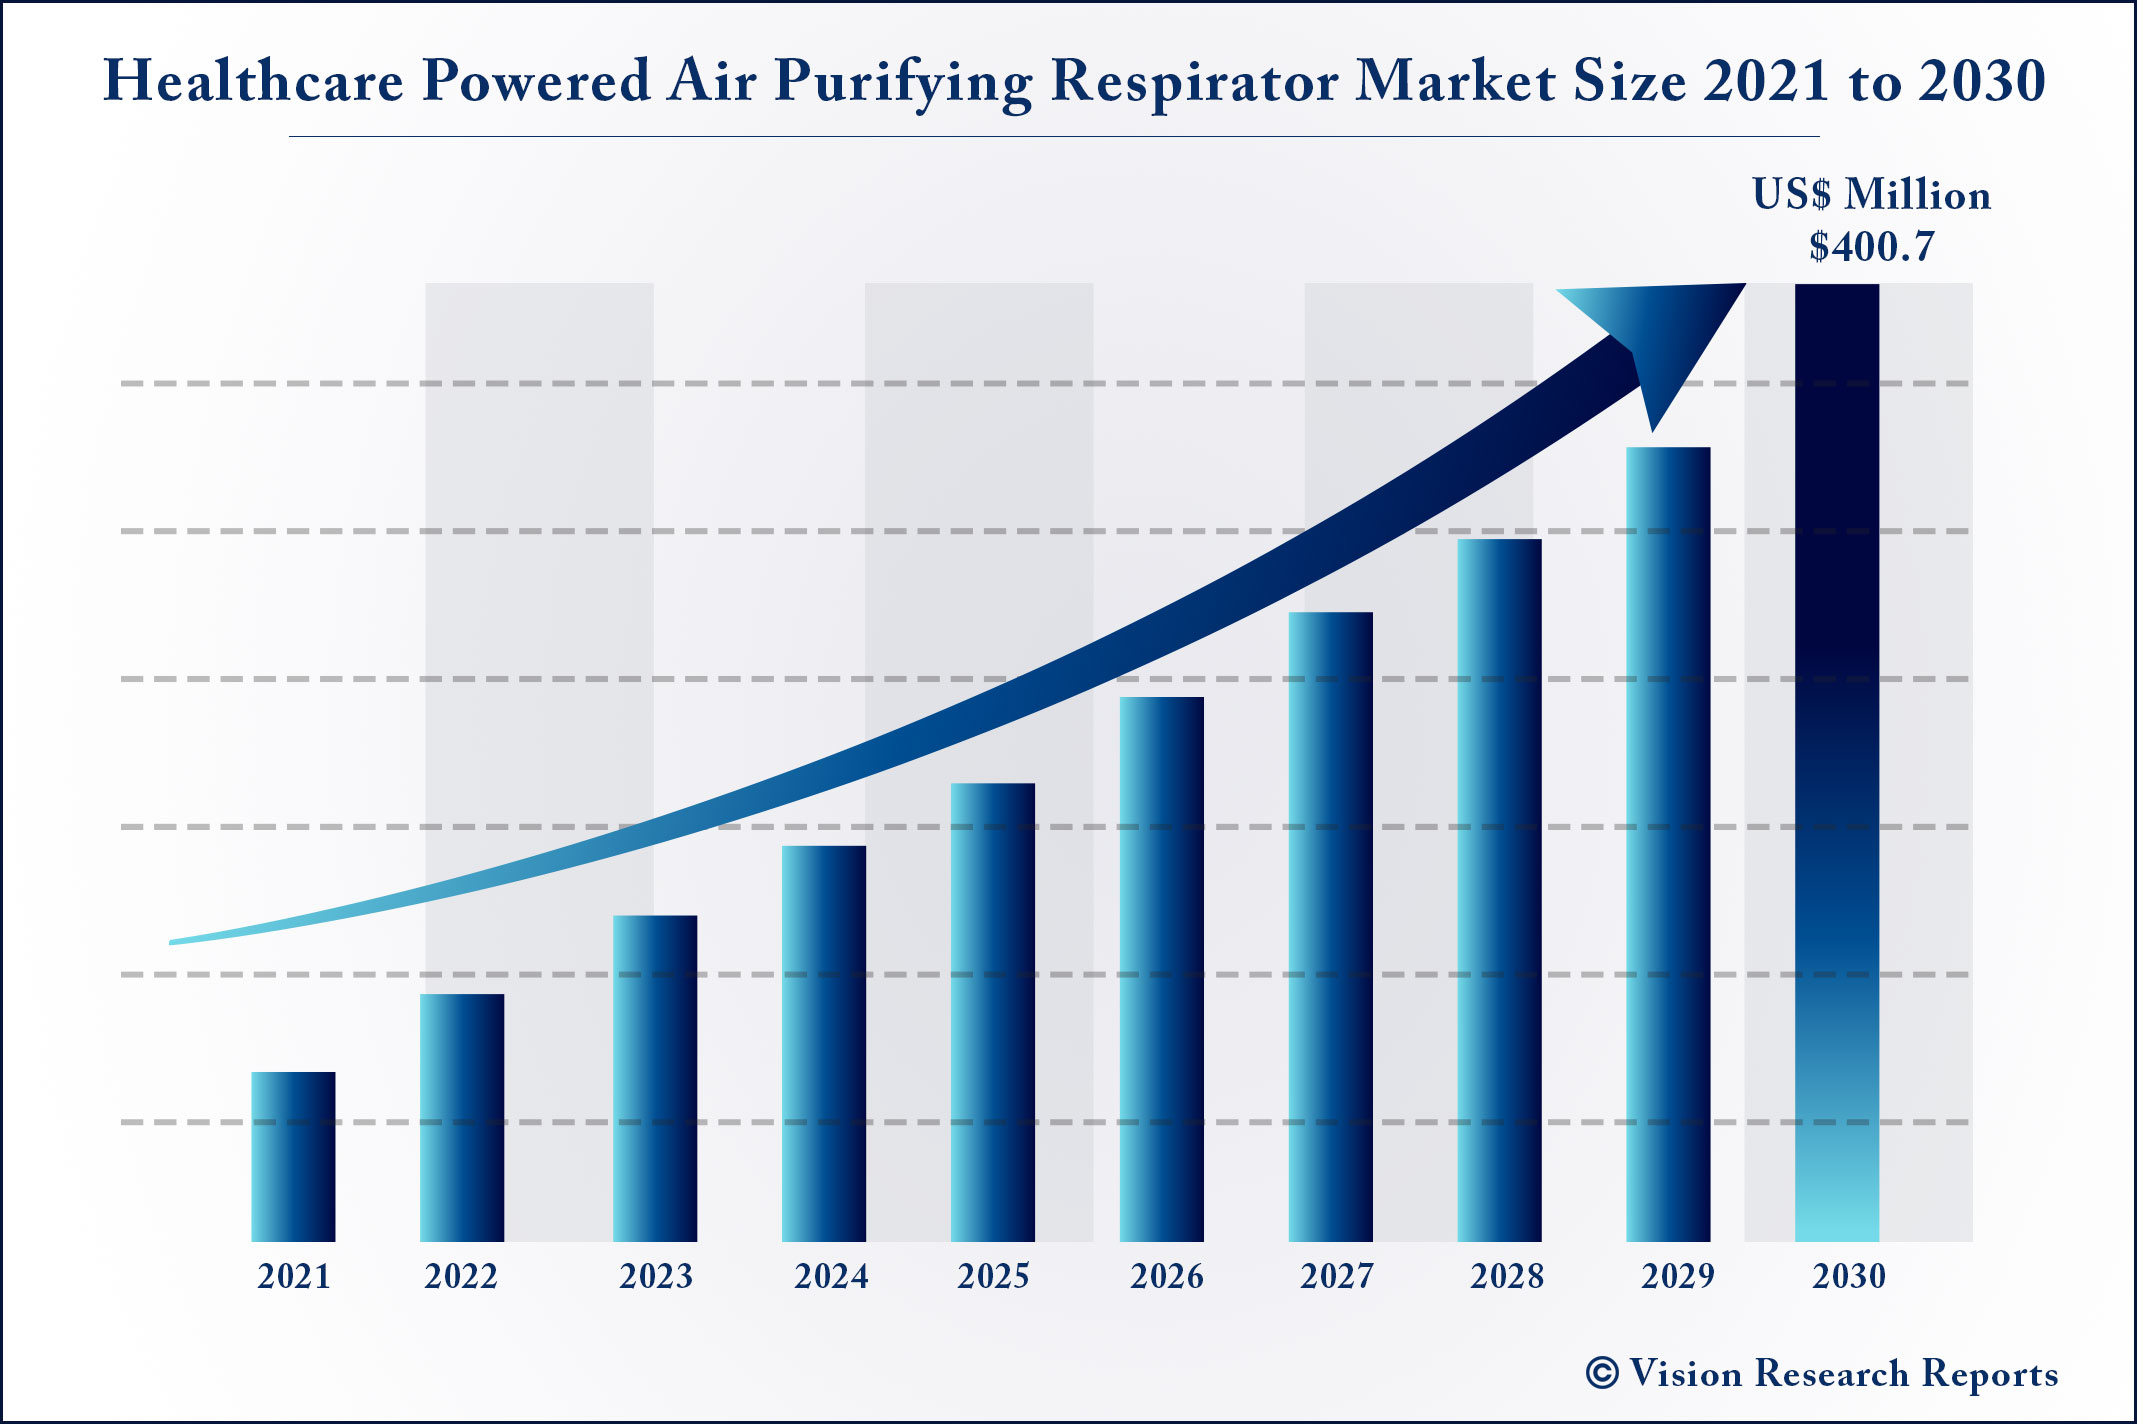 Healthcare Powered Air Purifying Respirator Market Size 2021 to 2030